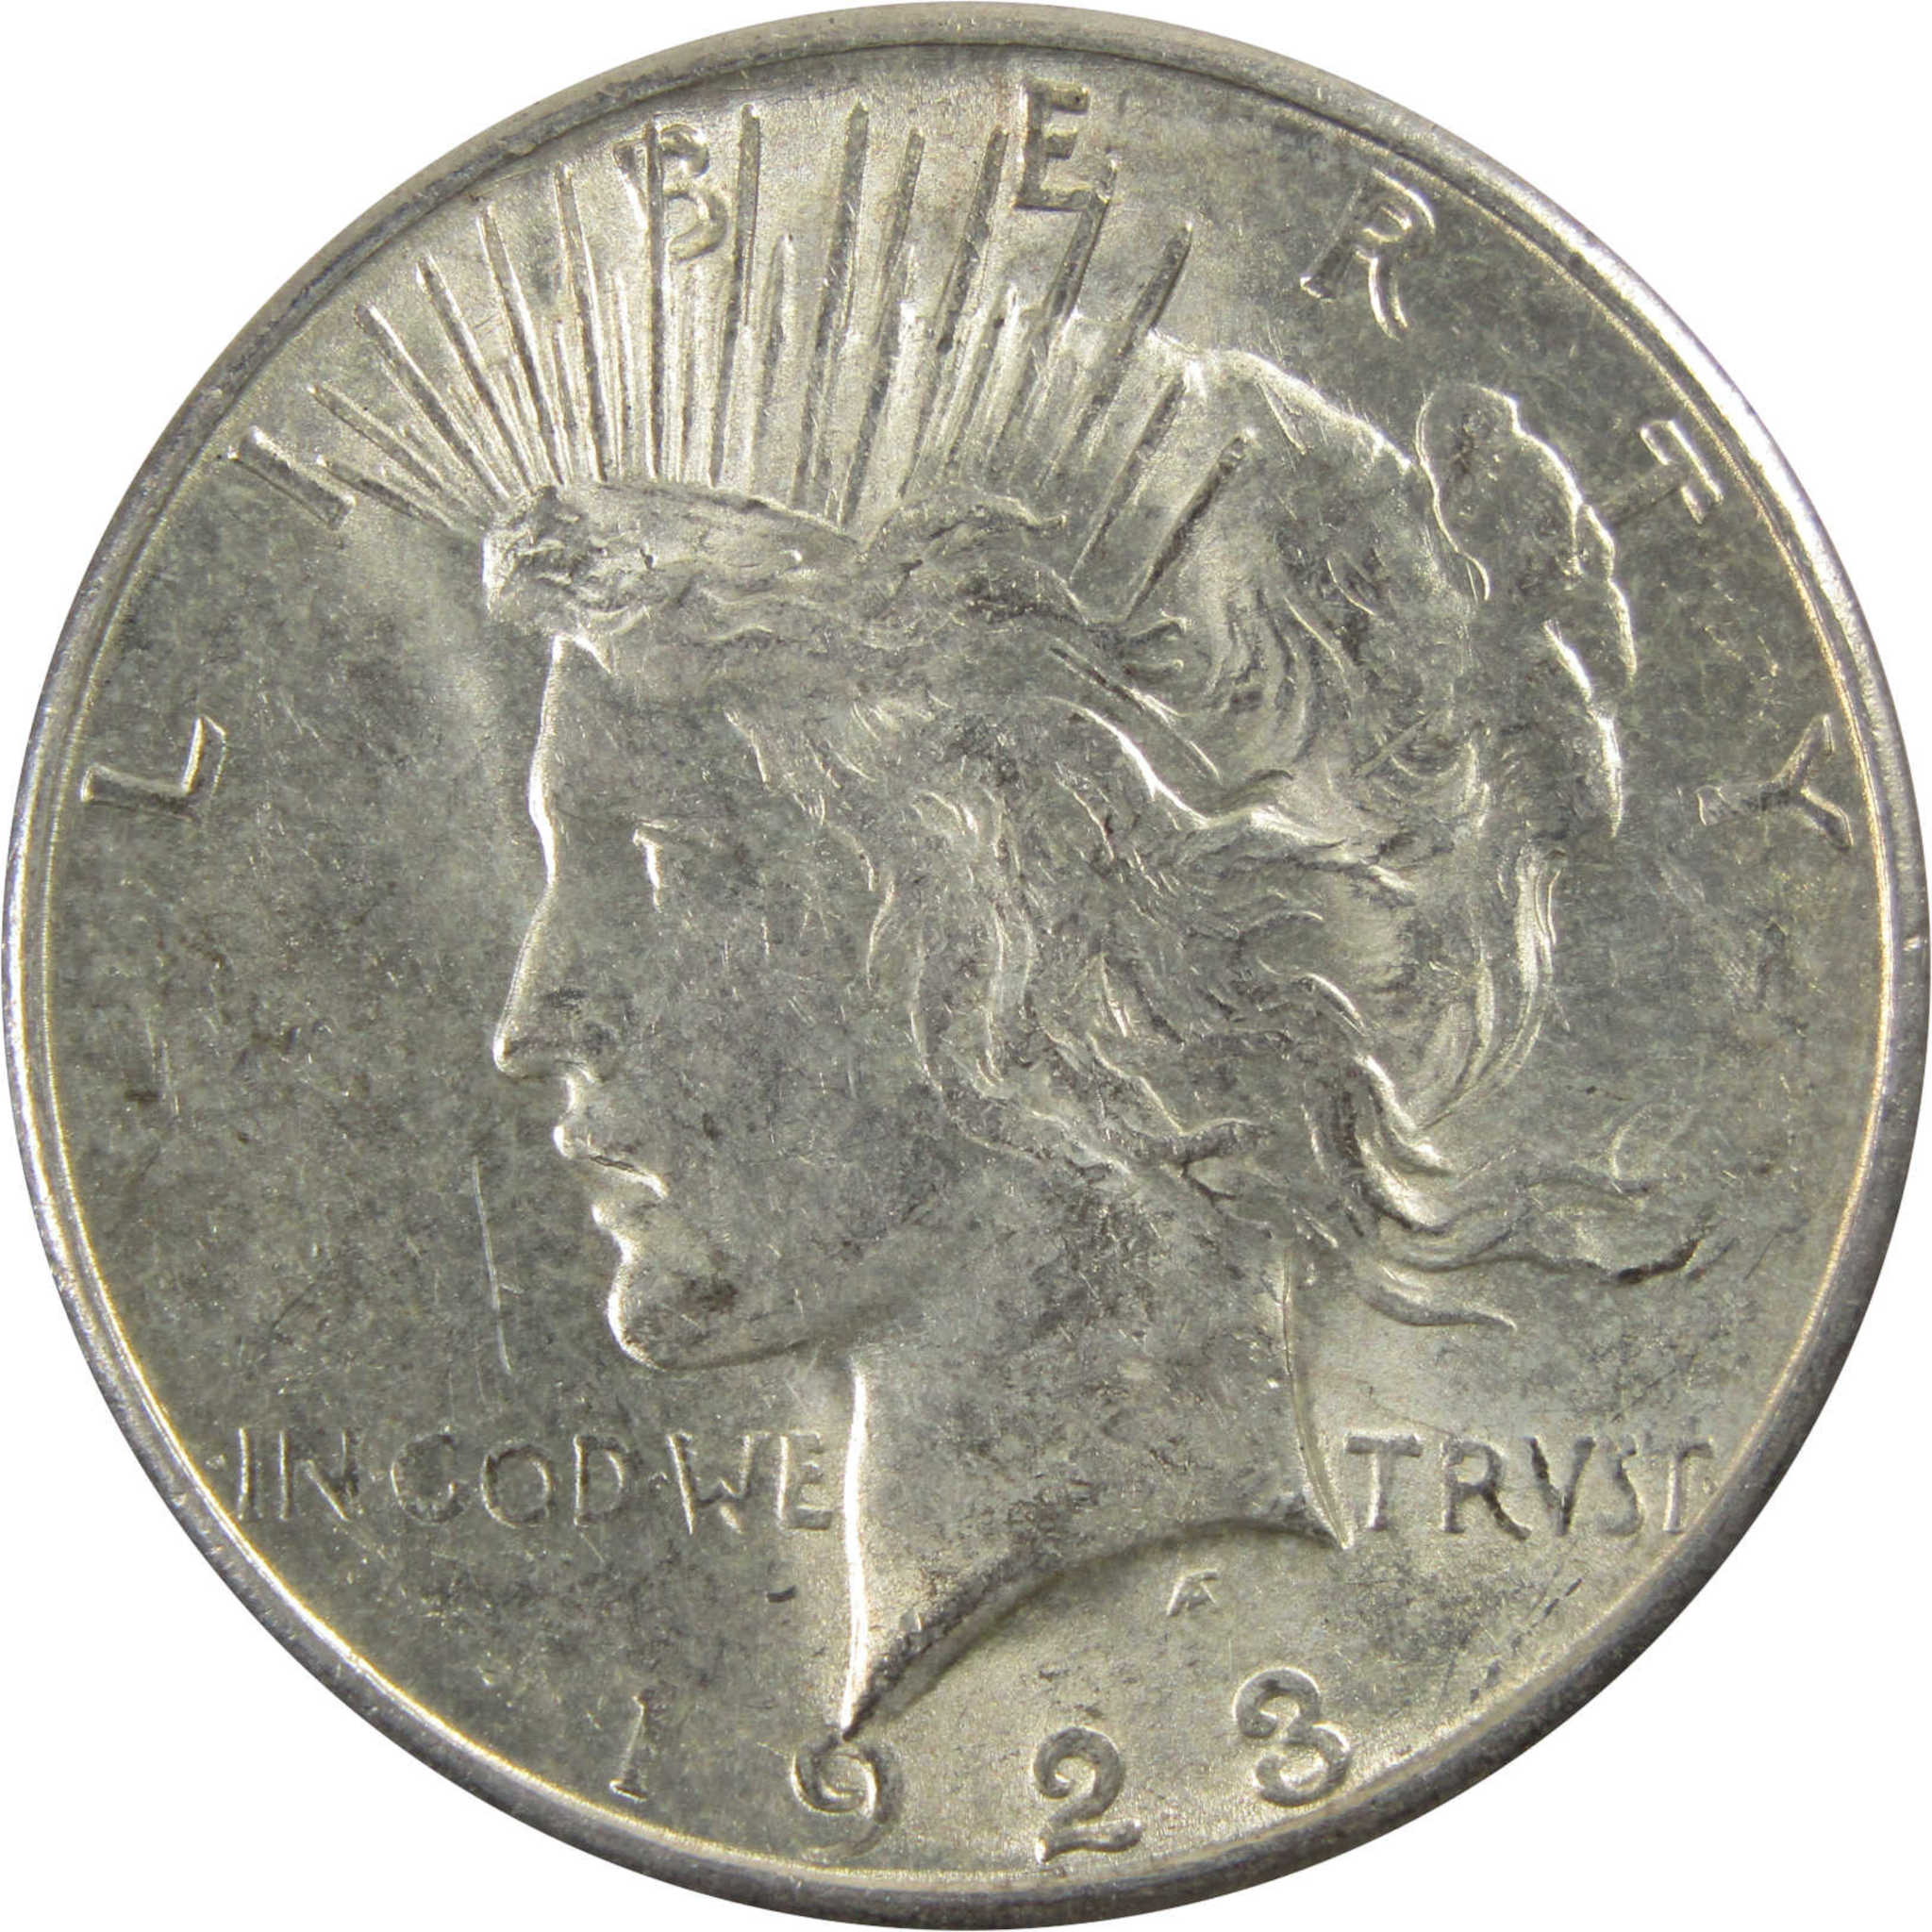 1923 S Peace Dollar AU About Uncirculated 90% Silver $1 Coin SKU:I5426